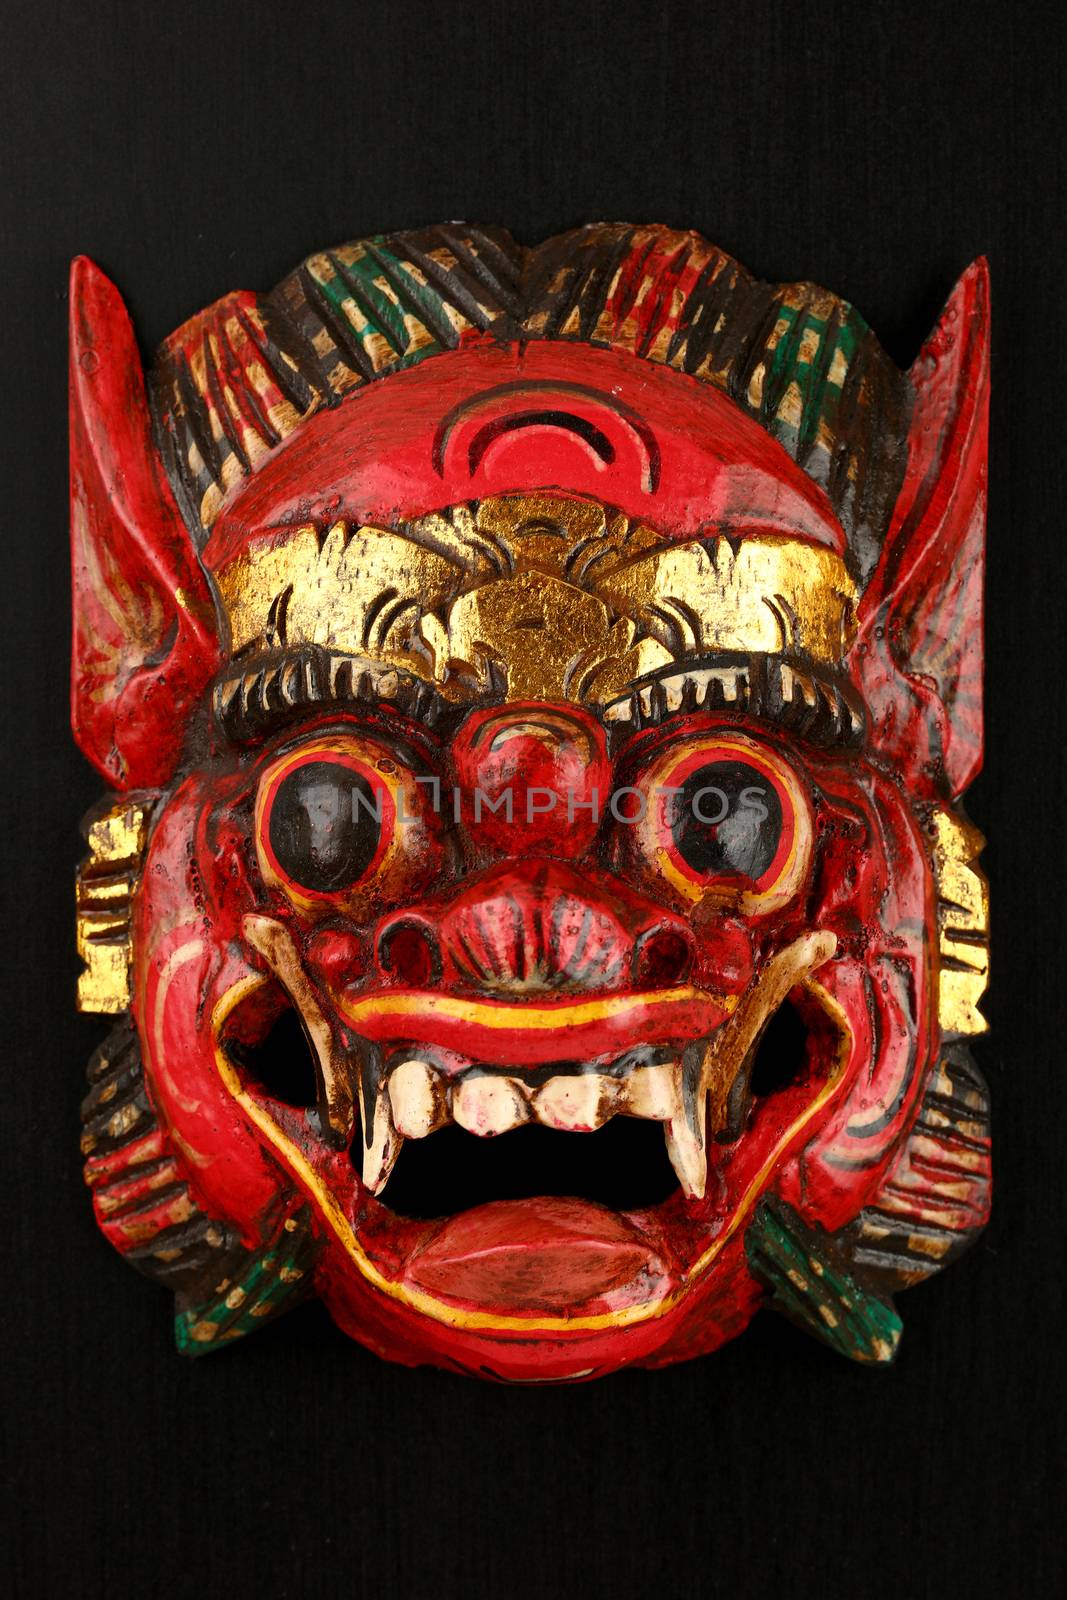 Asian traditional wooden red painted mask with face of demon, mythical lion or dragon painted on black background